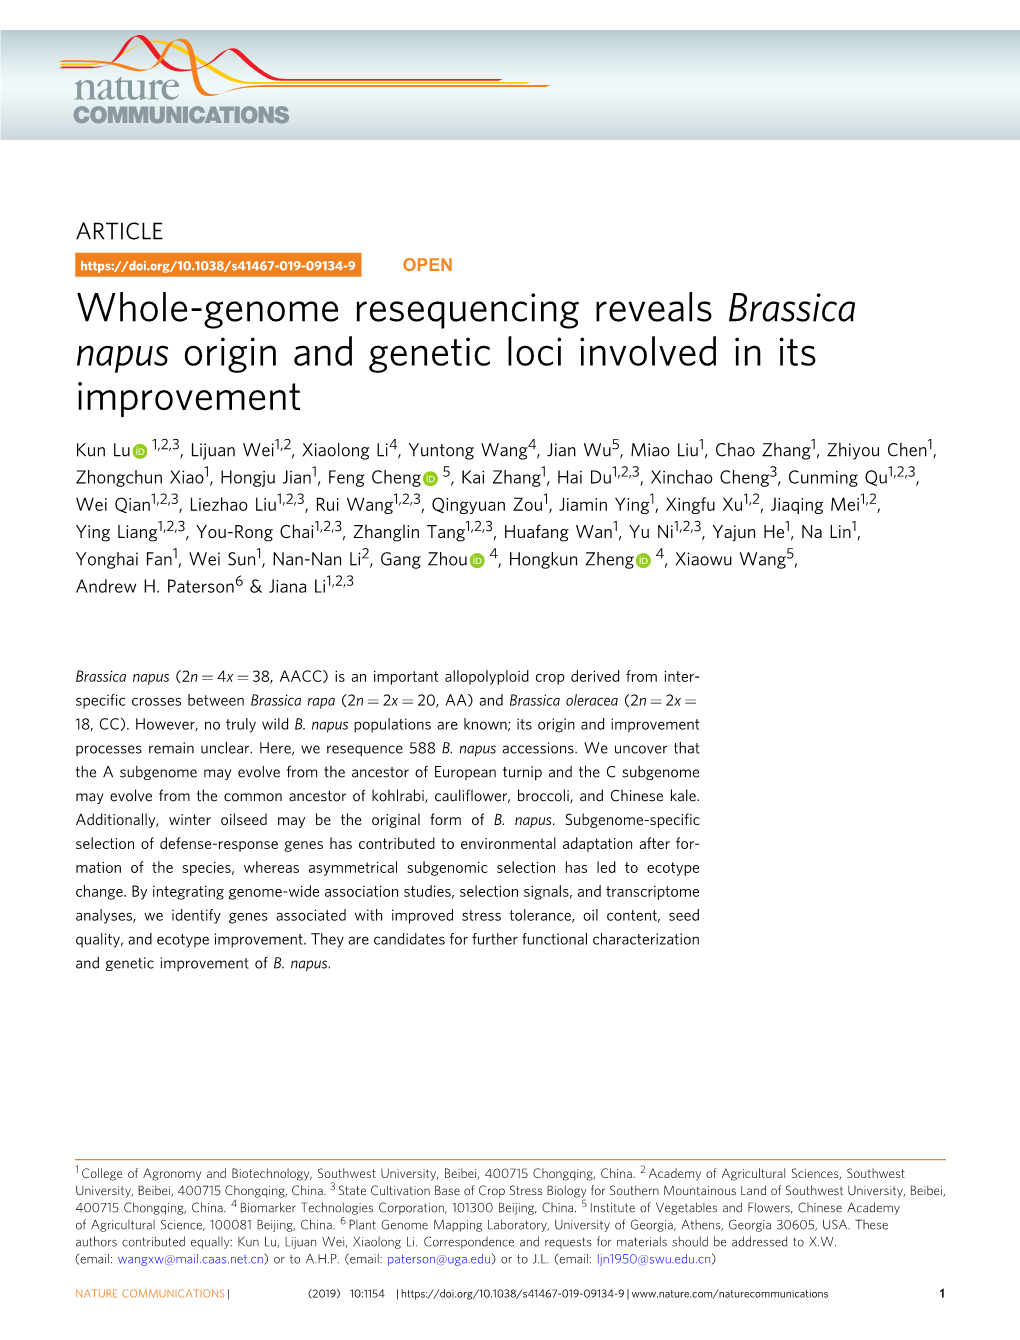 Whole-Genome Resequencing Reveals Brassica Napus Origin and Genetic Loci Involved in Its Improvement